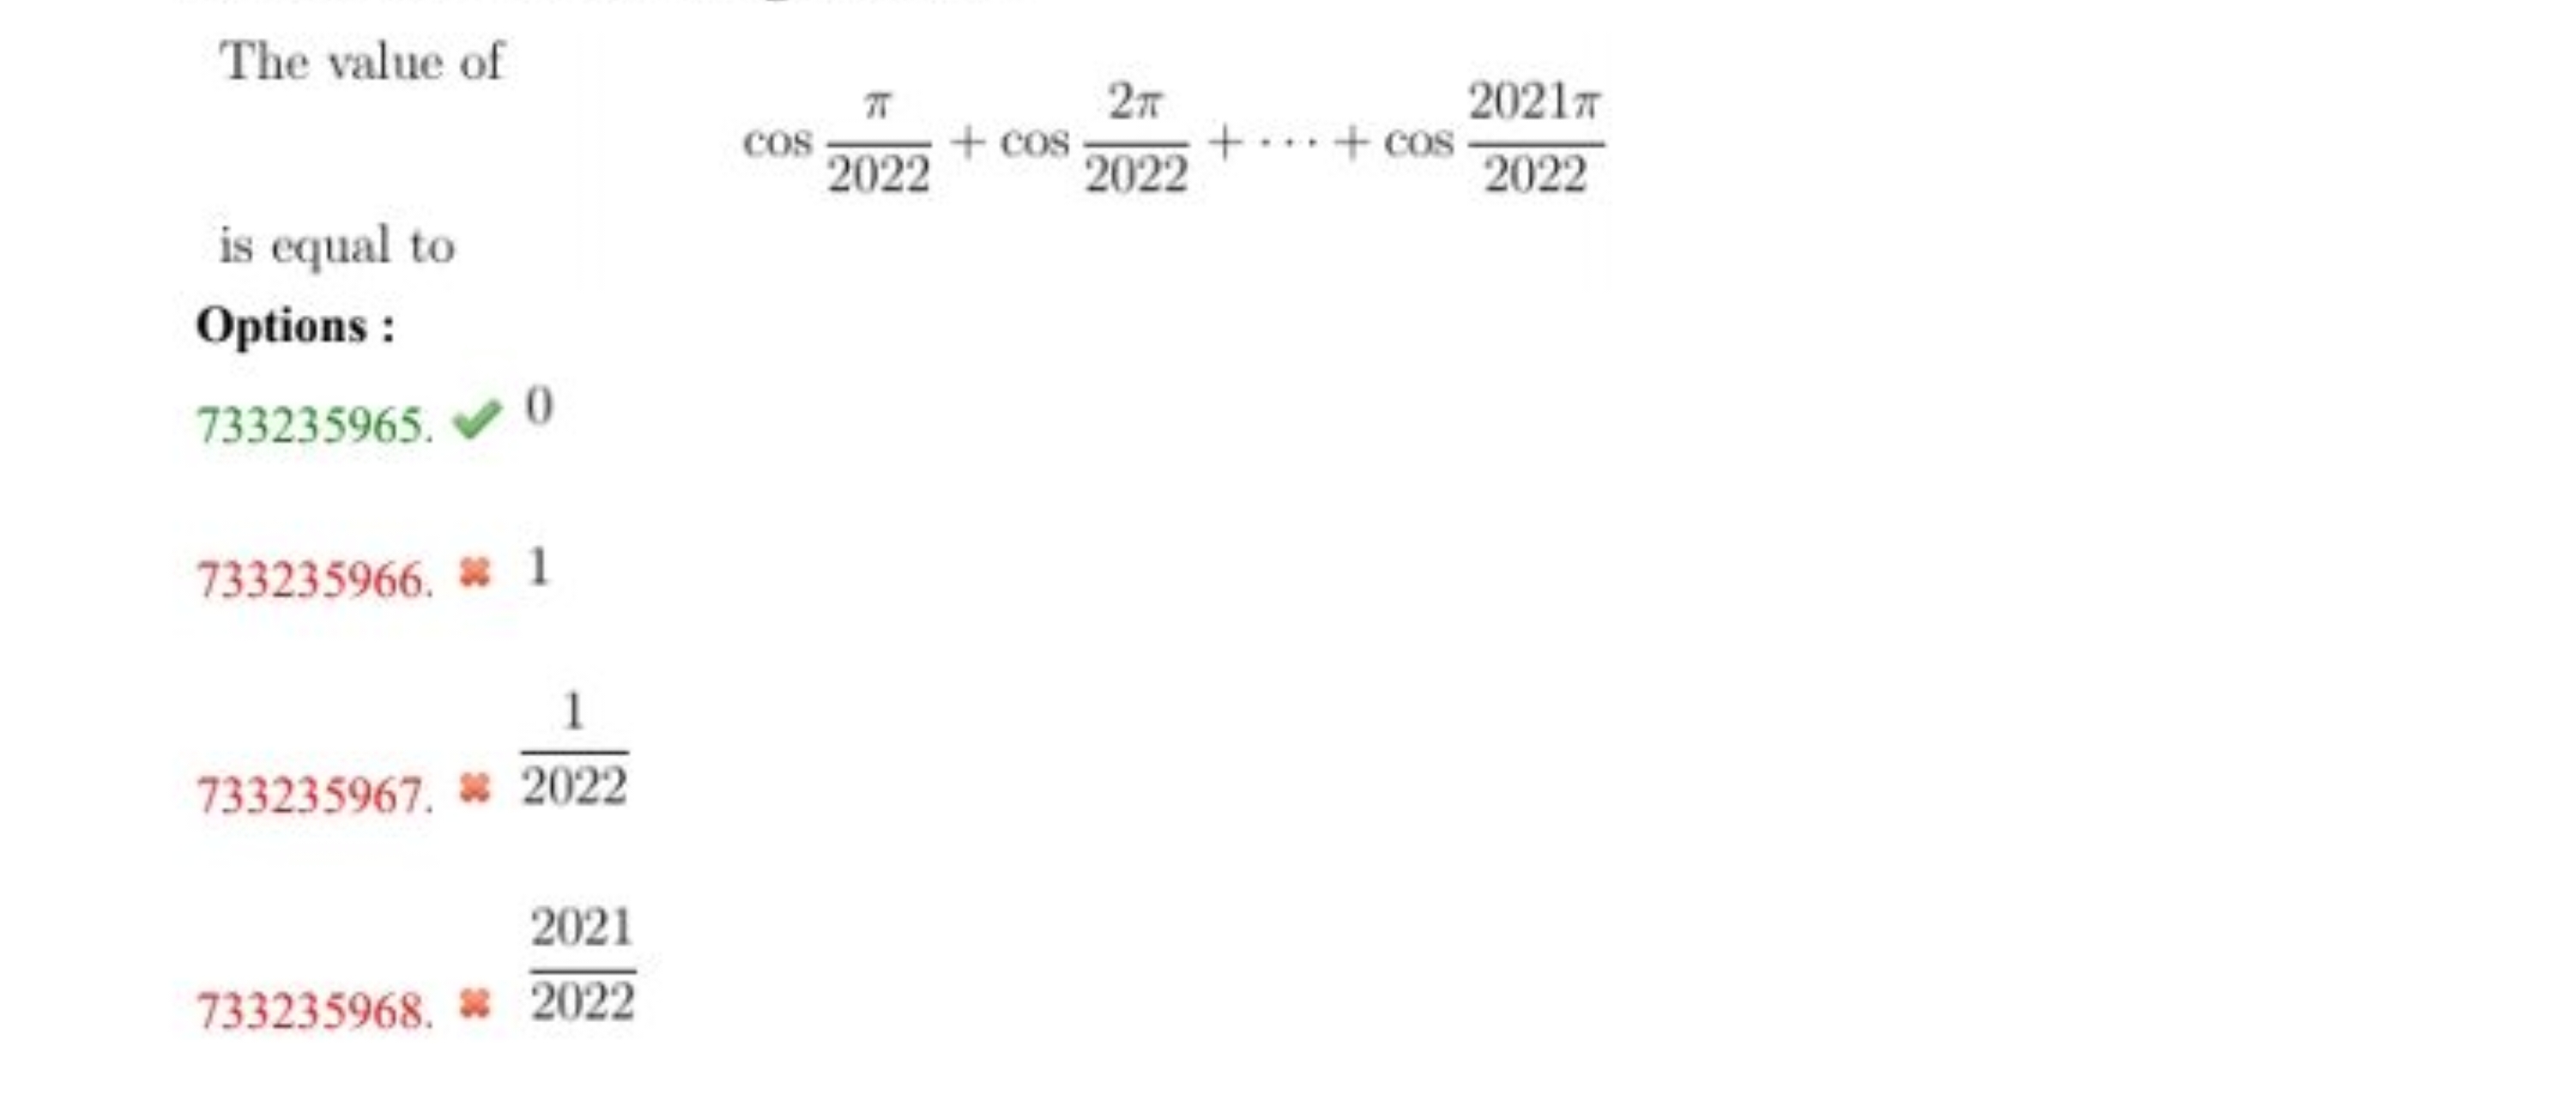 The value of
cos2022π​+cos20222π​+⋯+cos20222021π​
is equal to
Options 